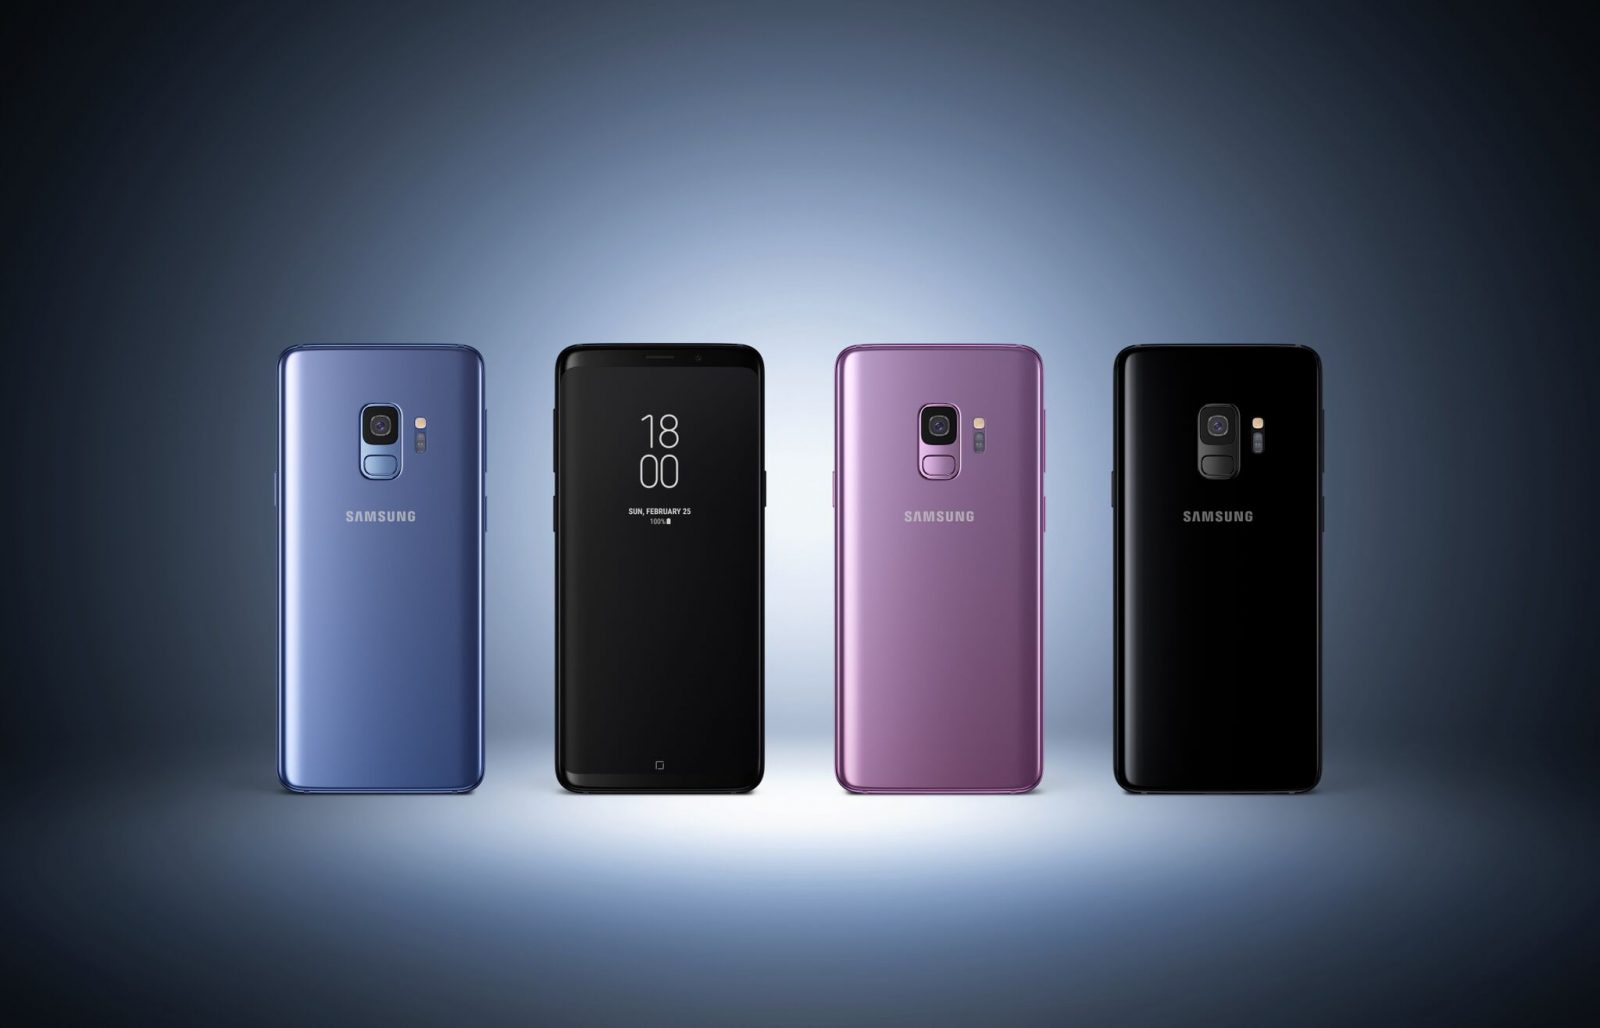 Samsung Galaxy s9 price - all colors